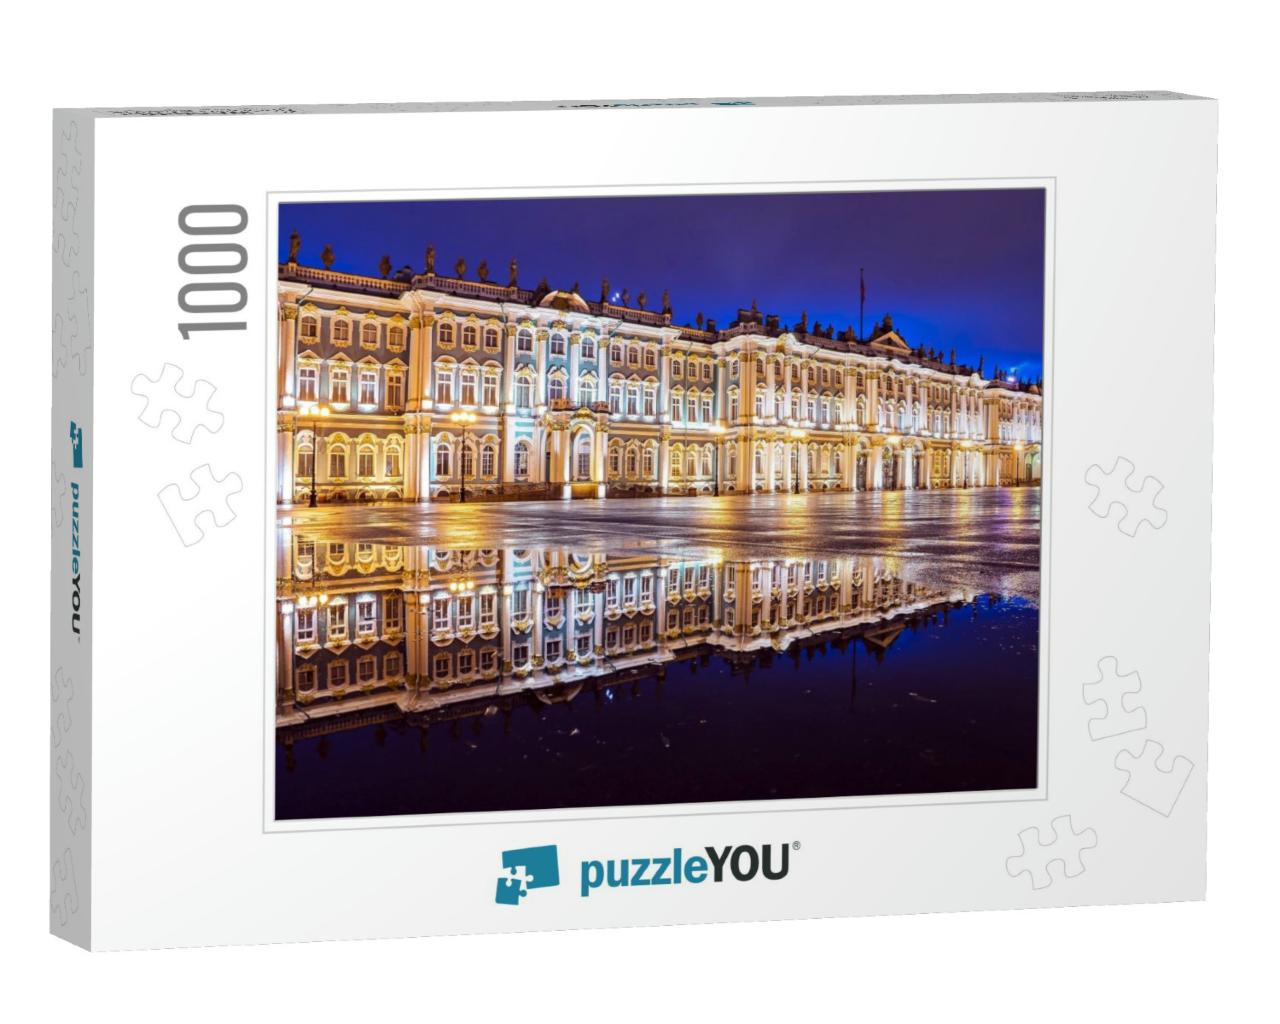 Hermitage on Palace Square, St. Petersburg... Jigsaw Puzzle with 1000 pieces